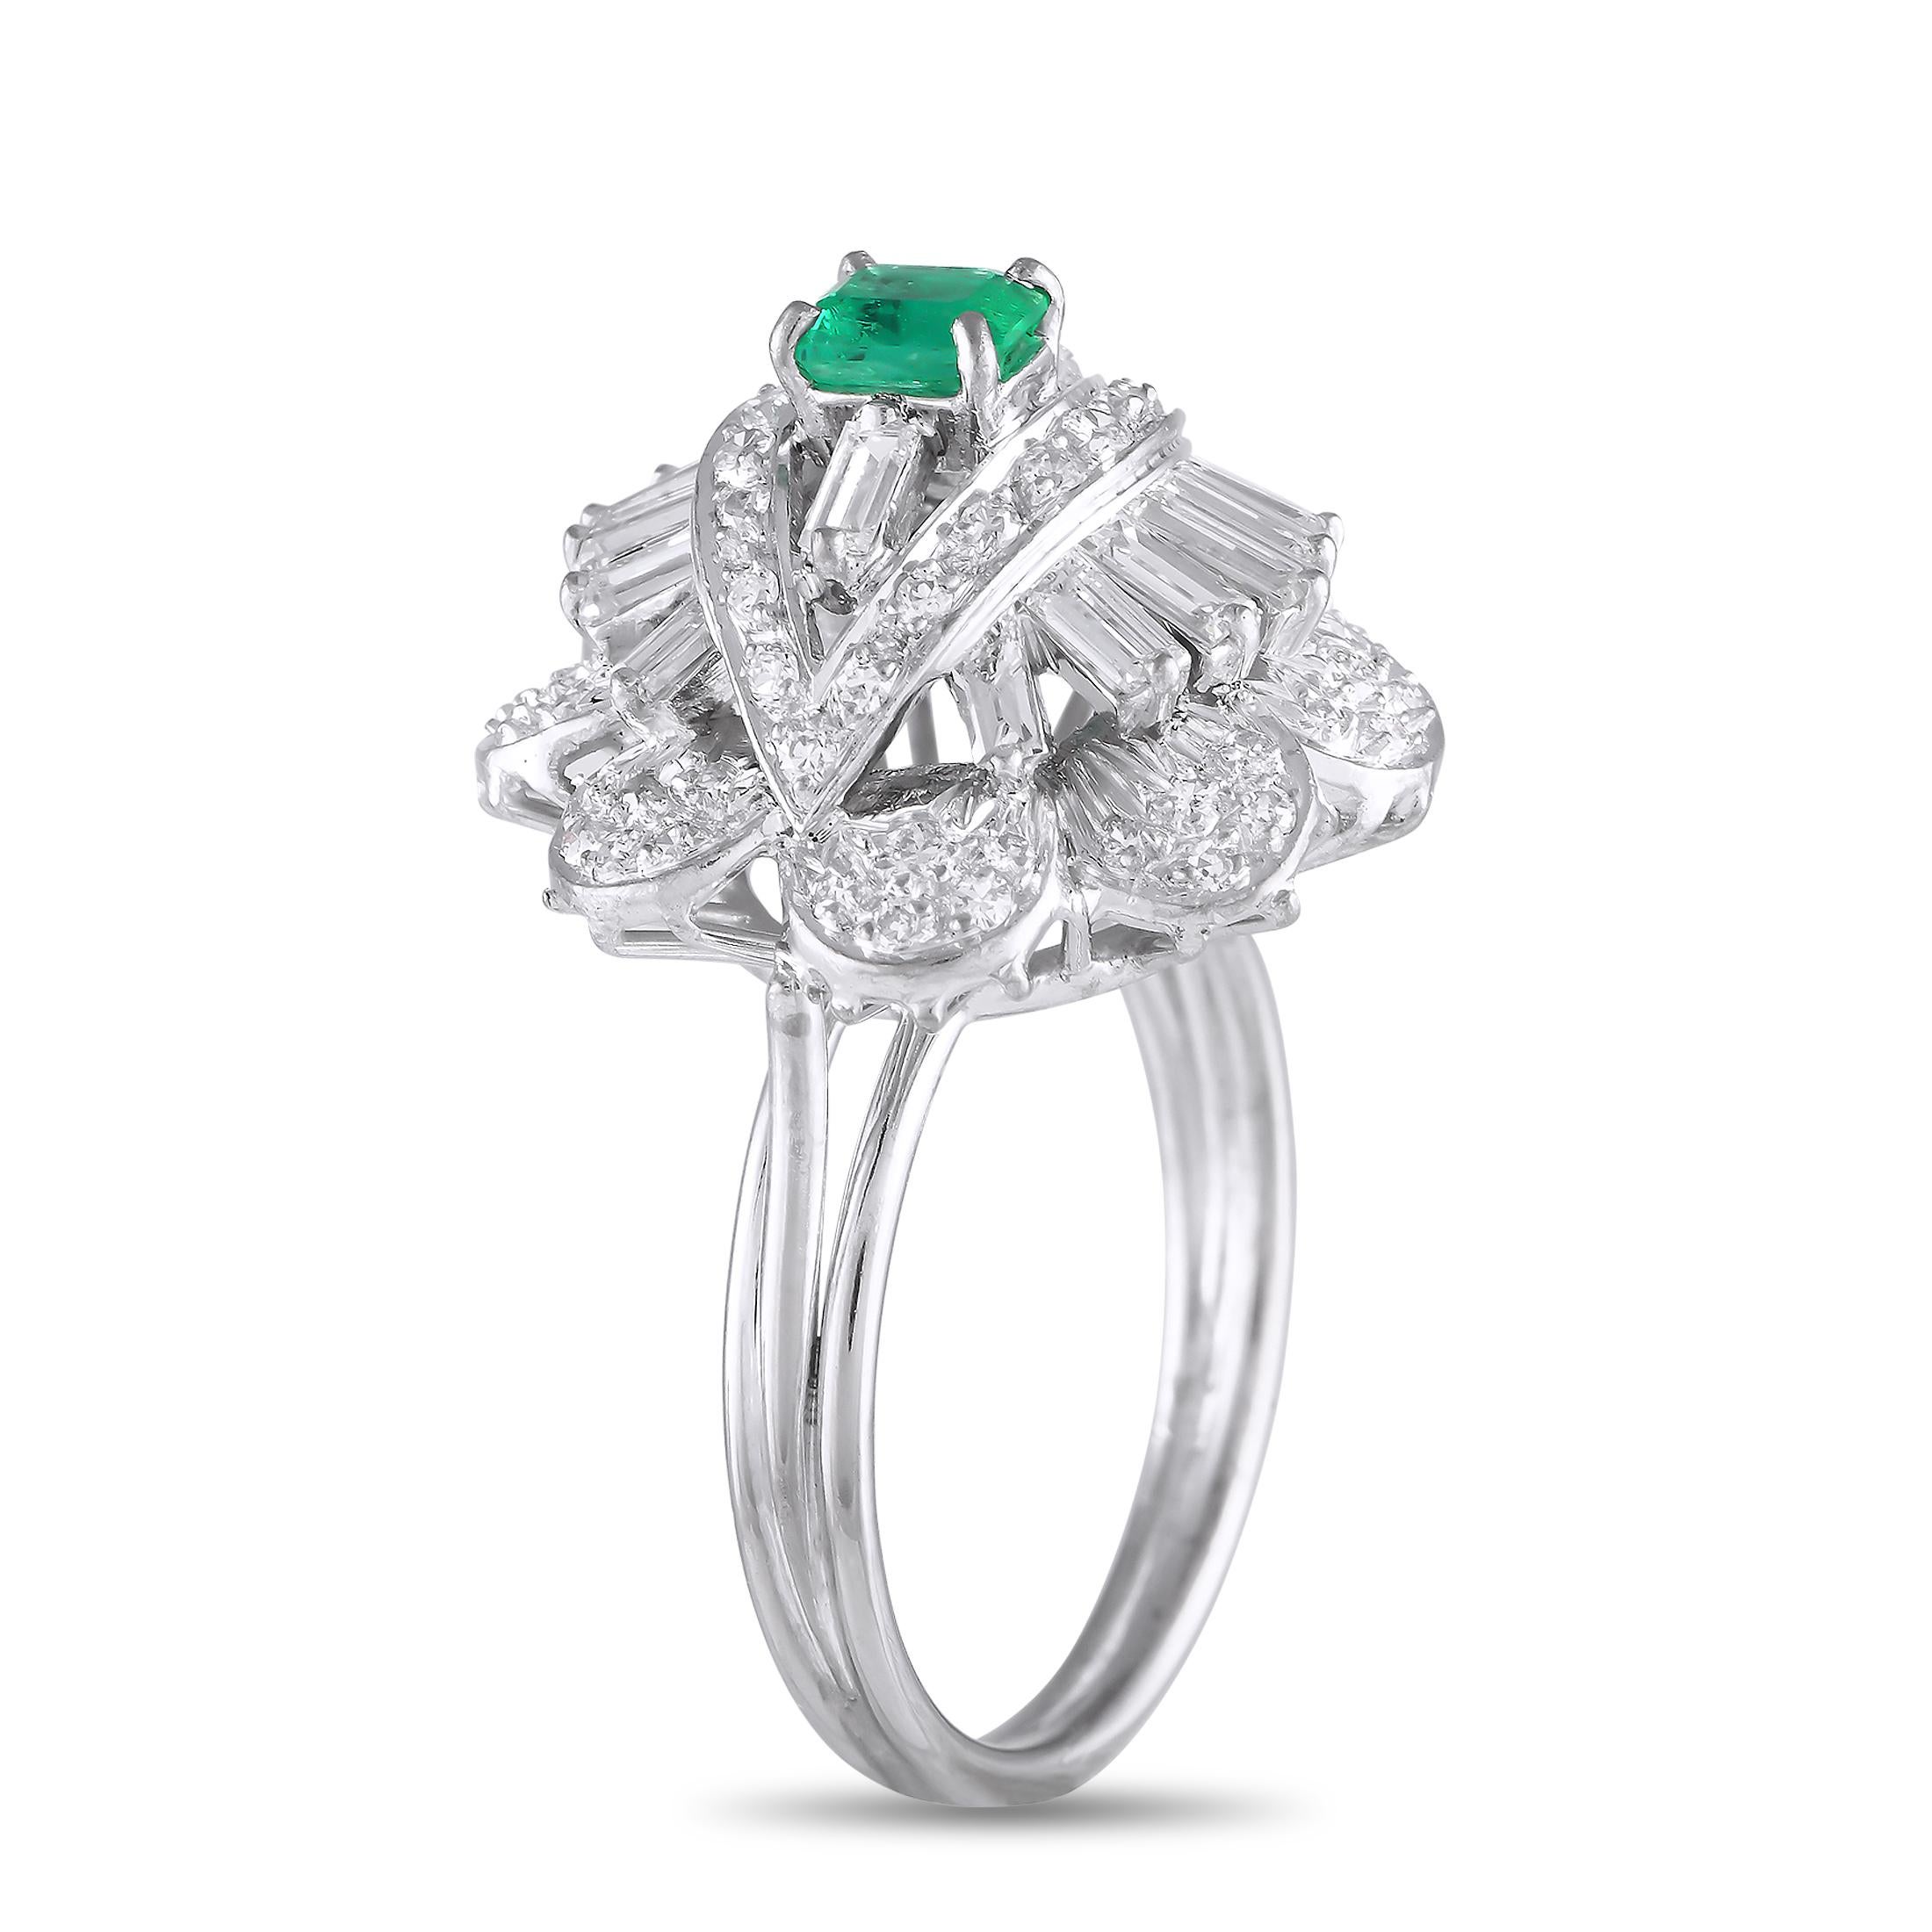 Dazzling Diamonds with a total weight of 1.30 carats allow this ring to effortlessly catch the light. A single 0.53 carat Emerald gemstone serves as a stunning focal point at the center, while an intricate 18K White Gold setting with dynamic